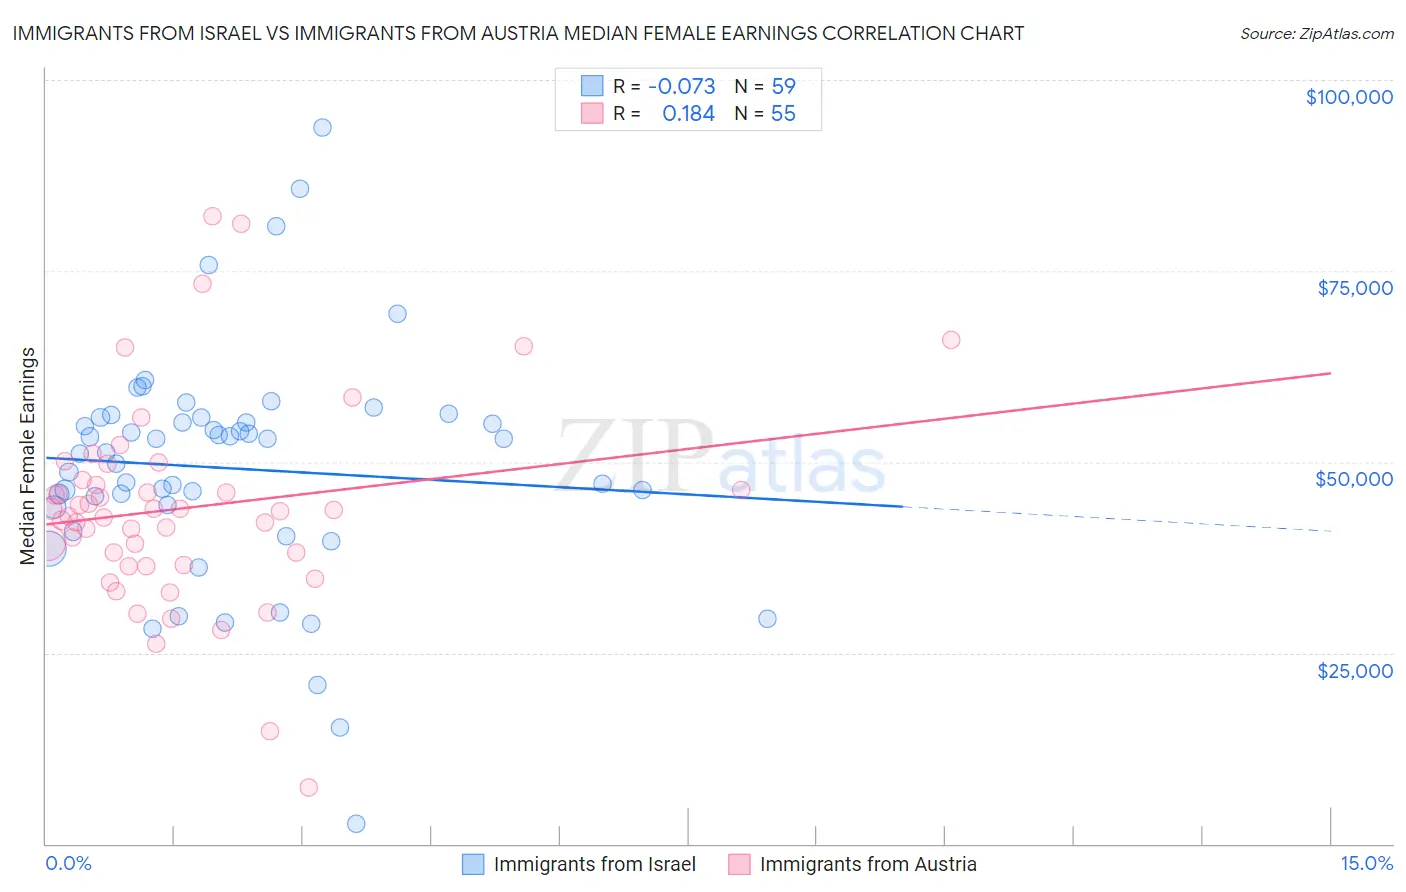 Immigrants from Israel vs Immigrants from Austria Median Female Earnings